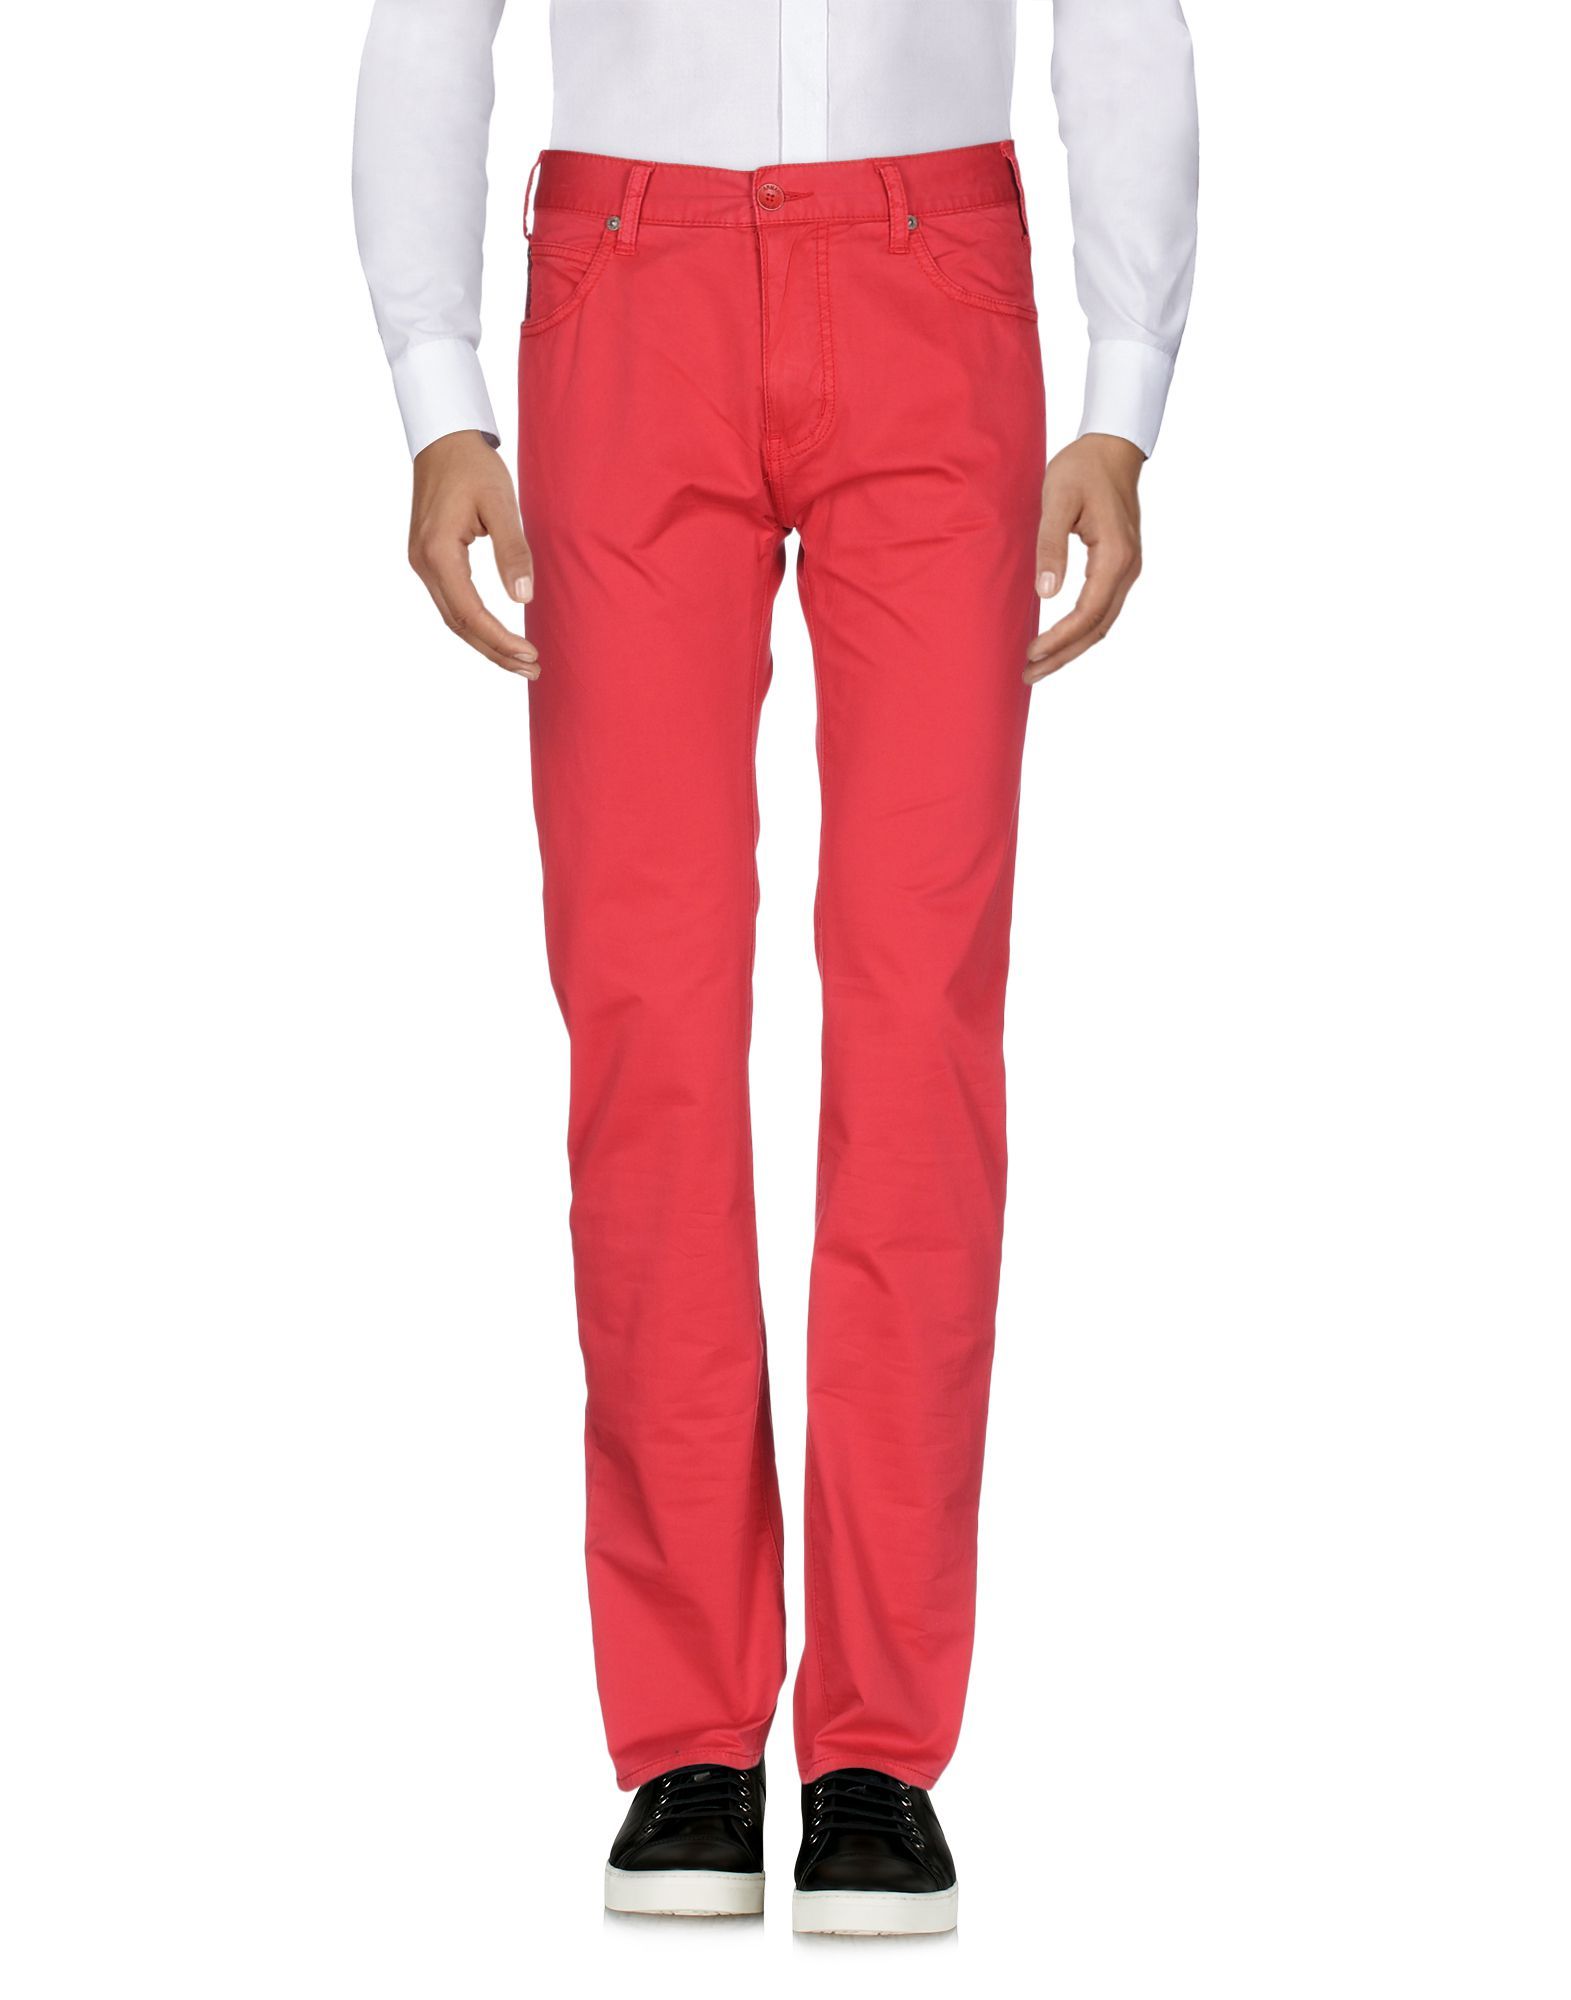 armani jeans red